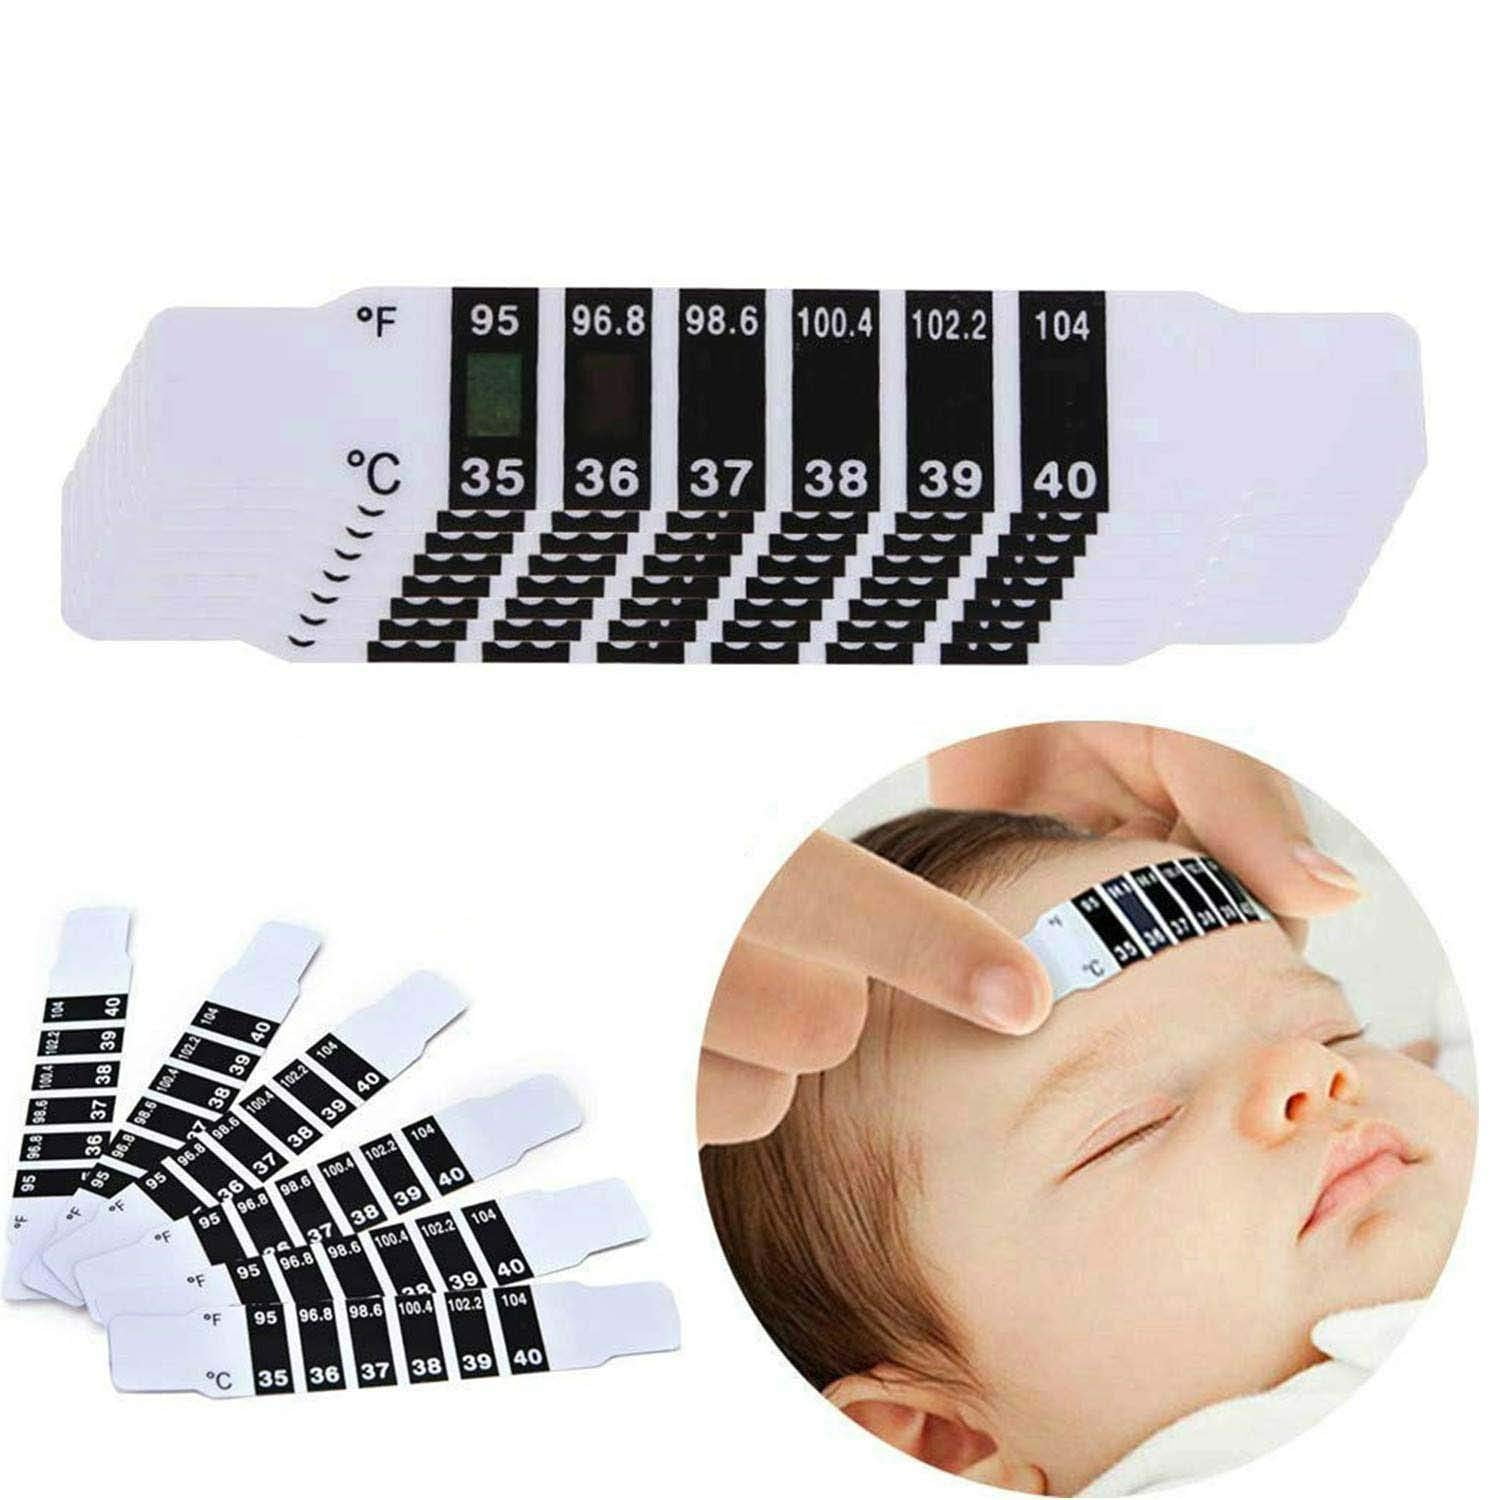 2x Safe Infant Kid Baby Forehead Strip Head Temperature Test Thermometer Sticker 